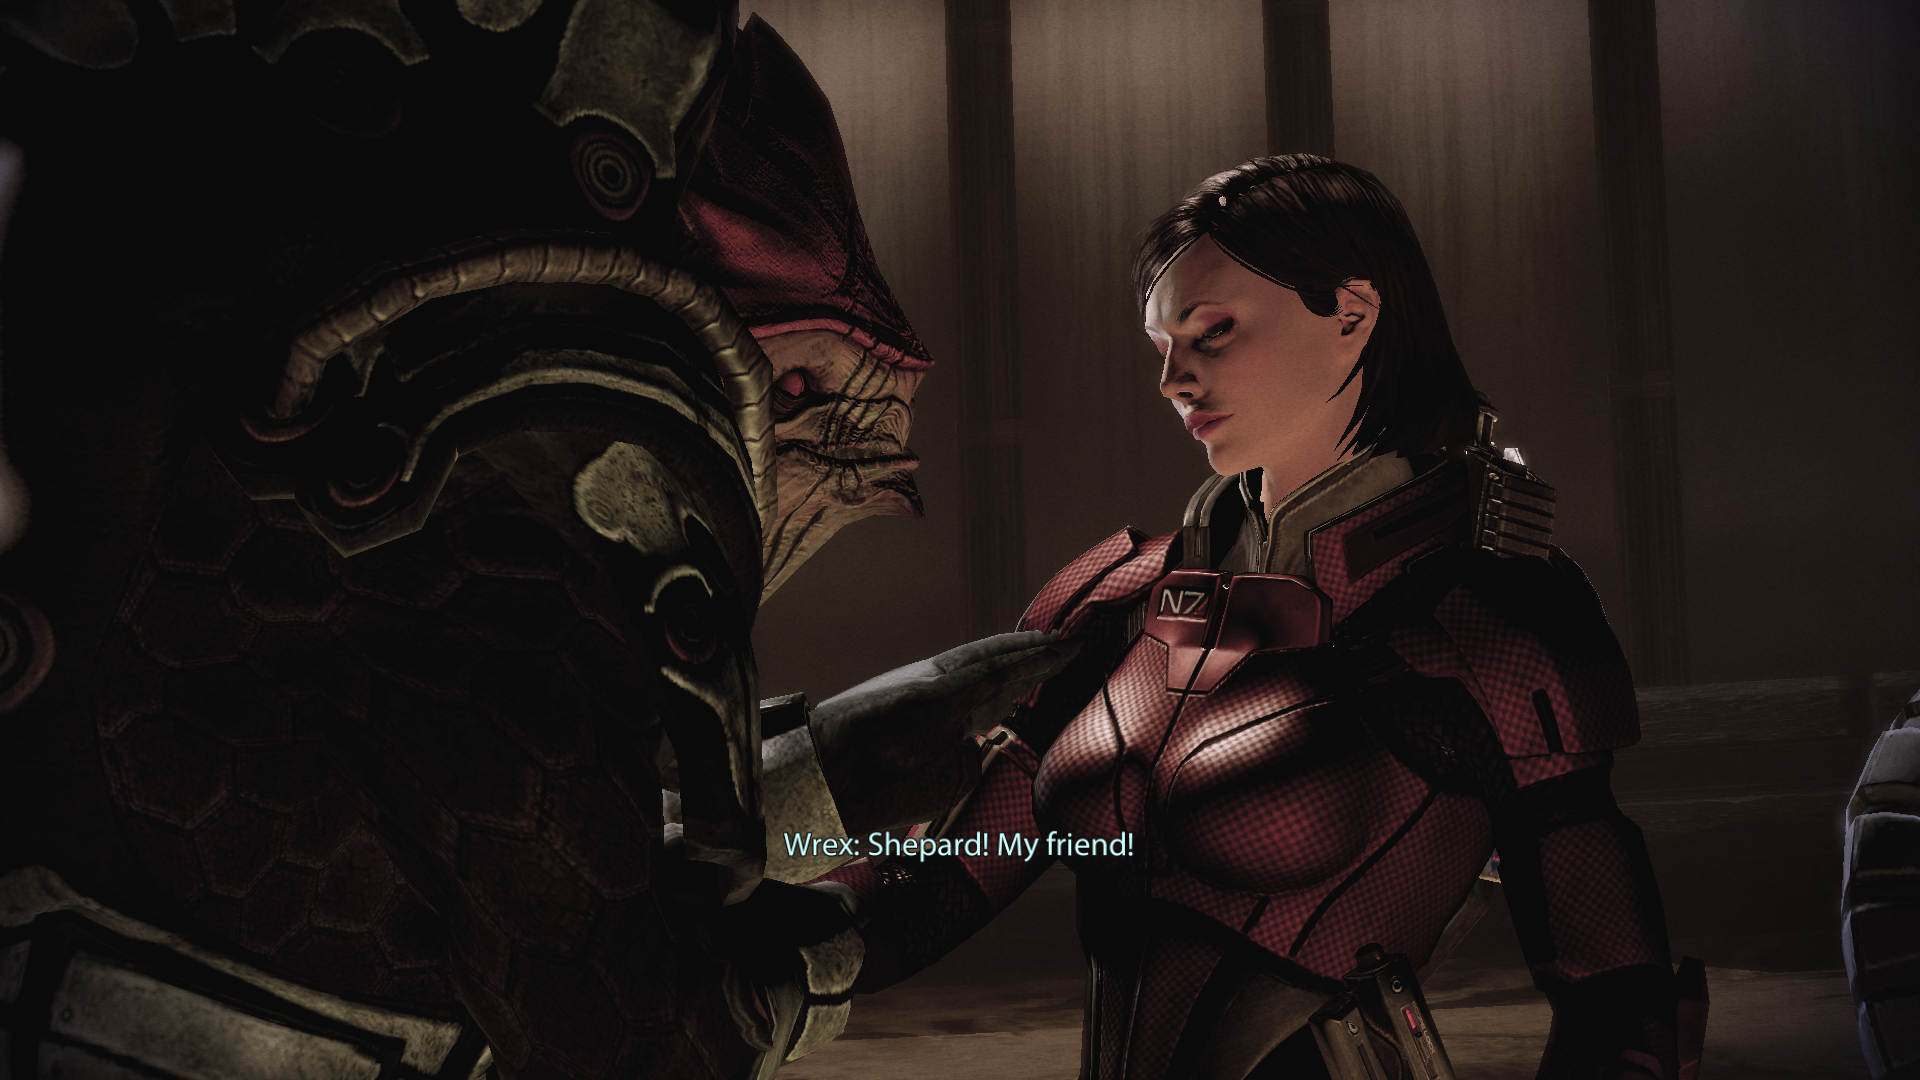 Two old friends meet: the krogan Wrex to the left pats the shoulder of protagonist Shepard to the right.